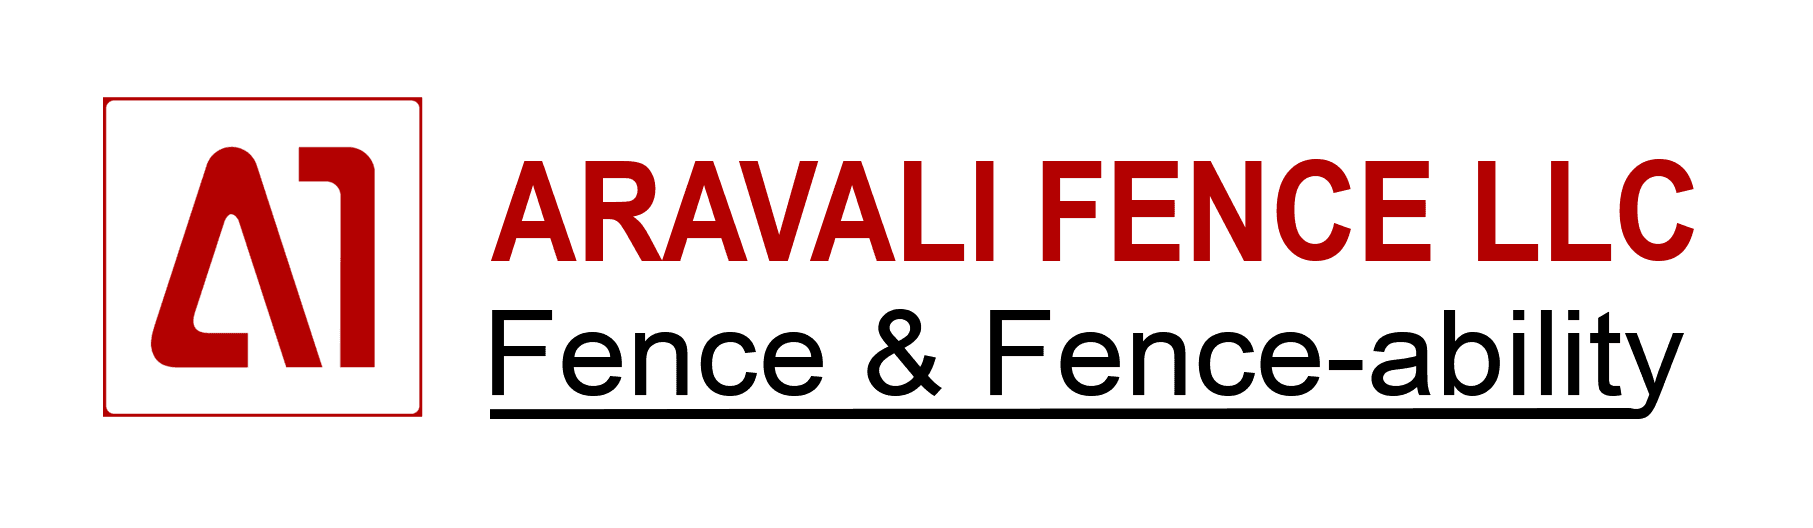 Product Our Products - Aravali Fence image